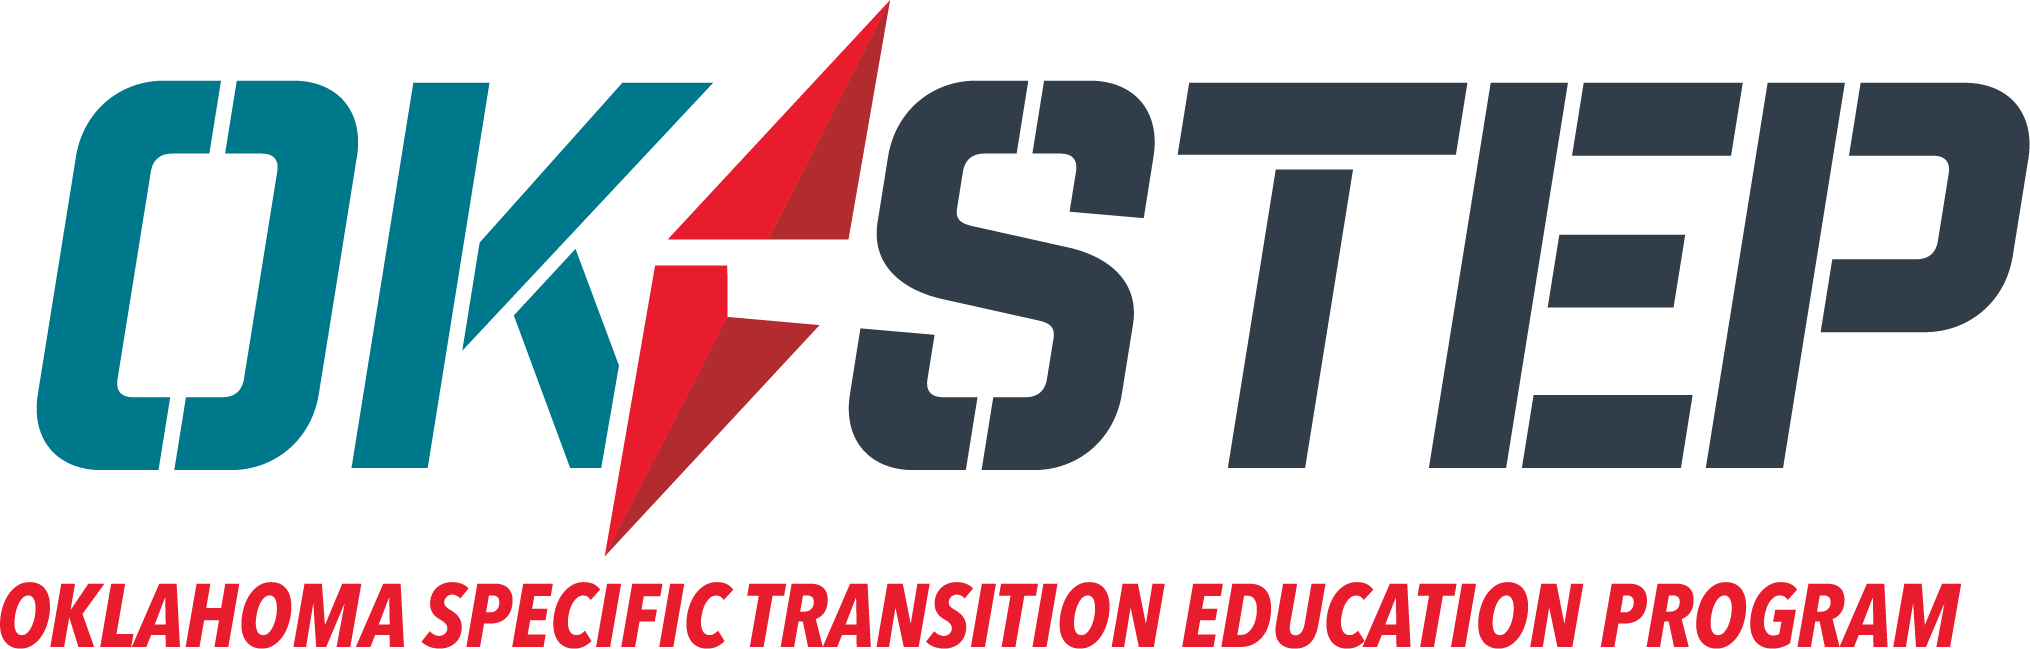 Home page of the Oklahoma Specific Transition Education Program - OKSTEP